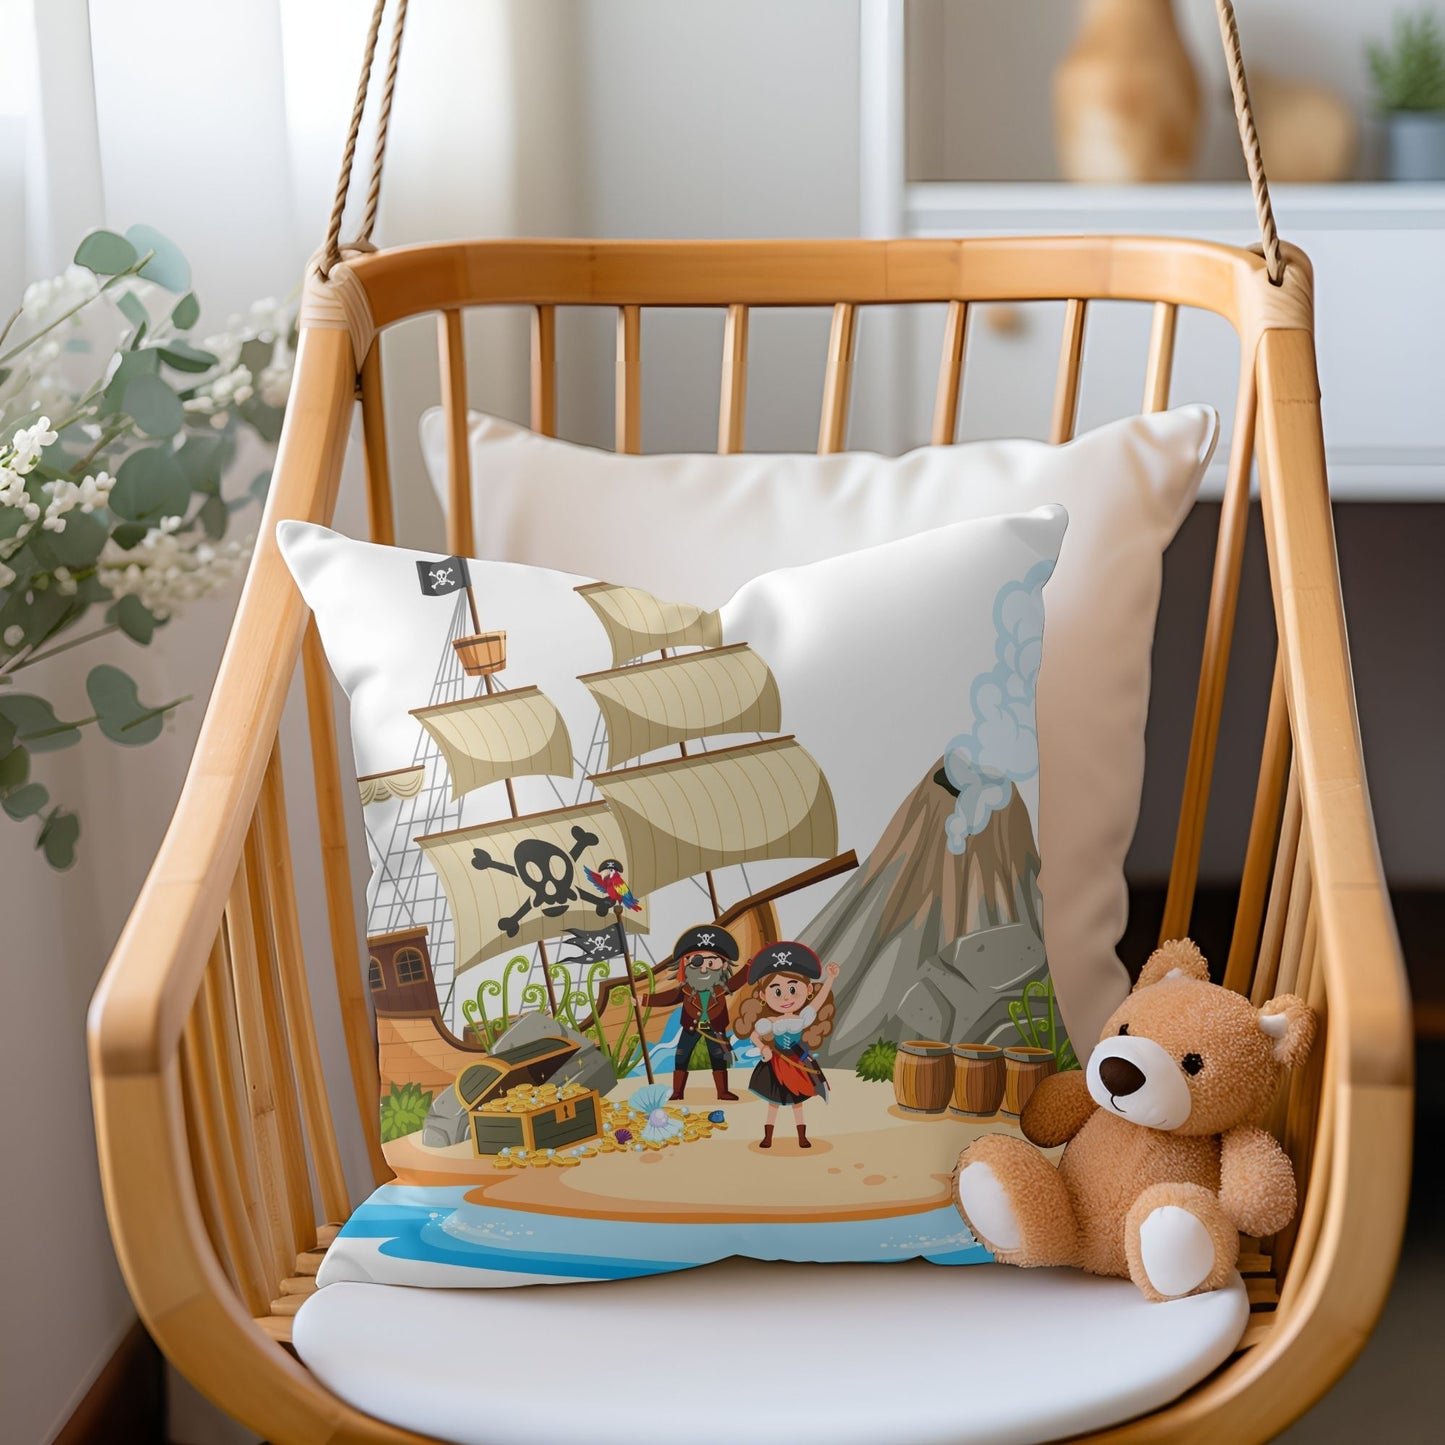 Adorable pirate-themed pillow perfect for young adventurers.